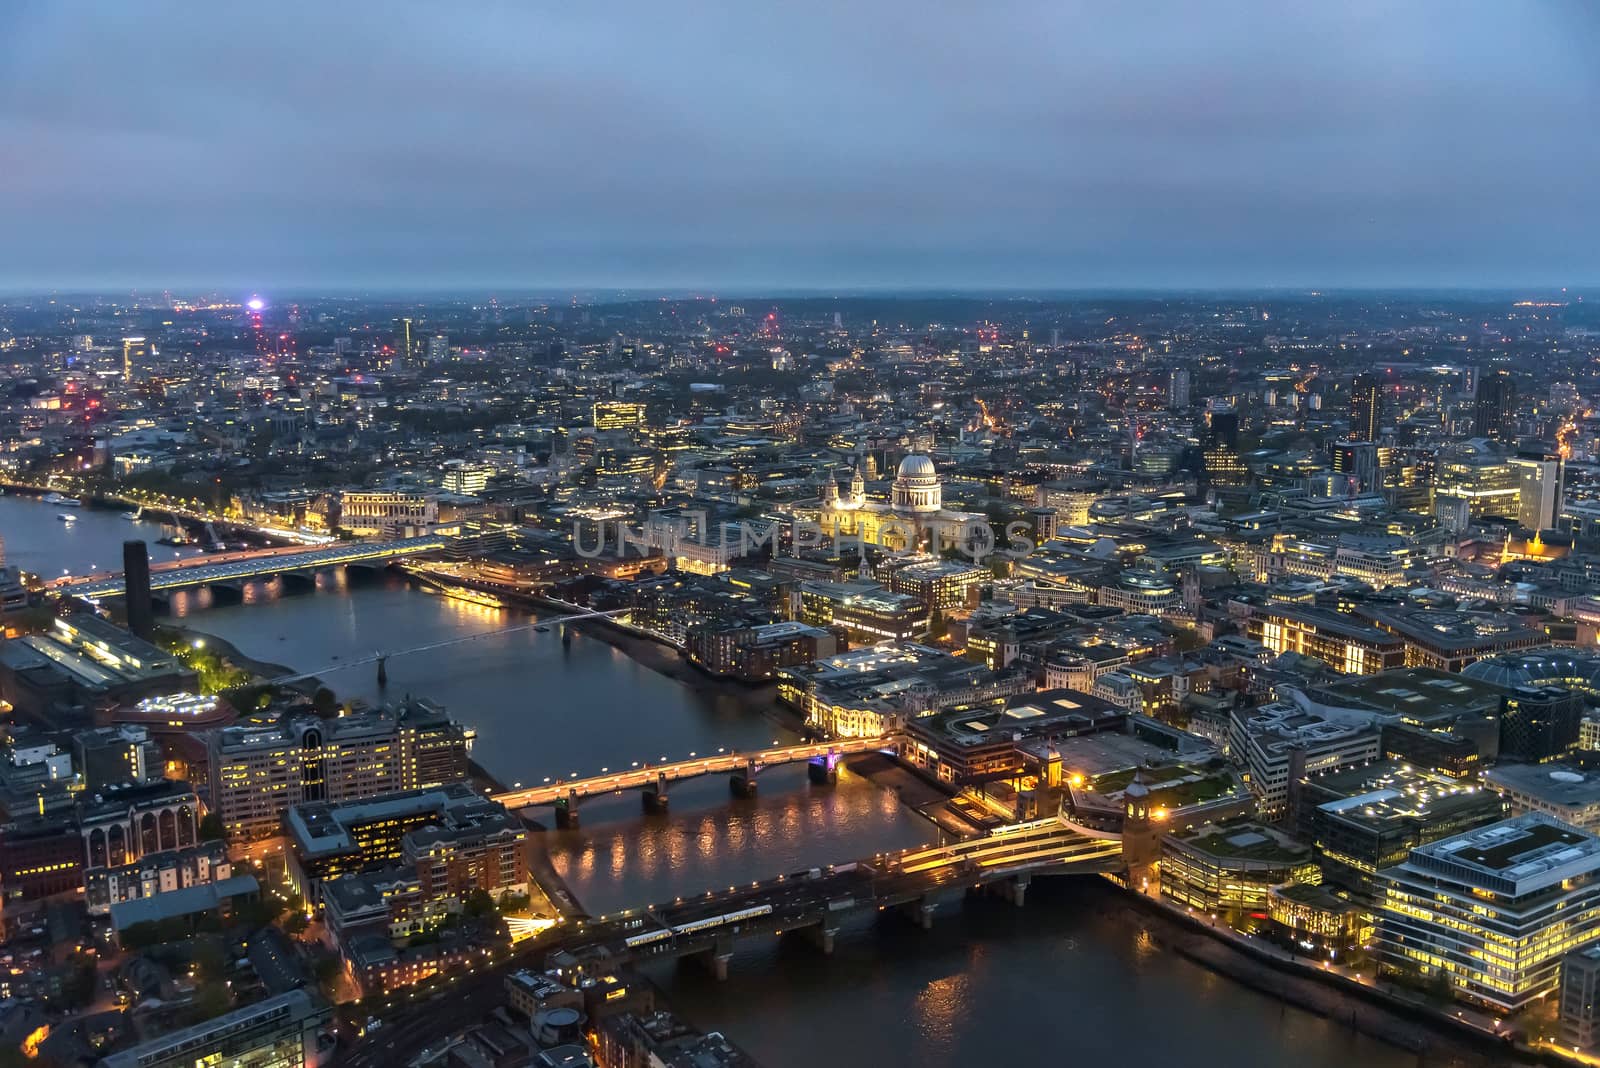 Aerial view of river Thames in London at dusk by mkos83